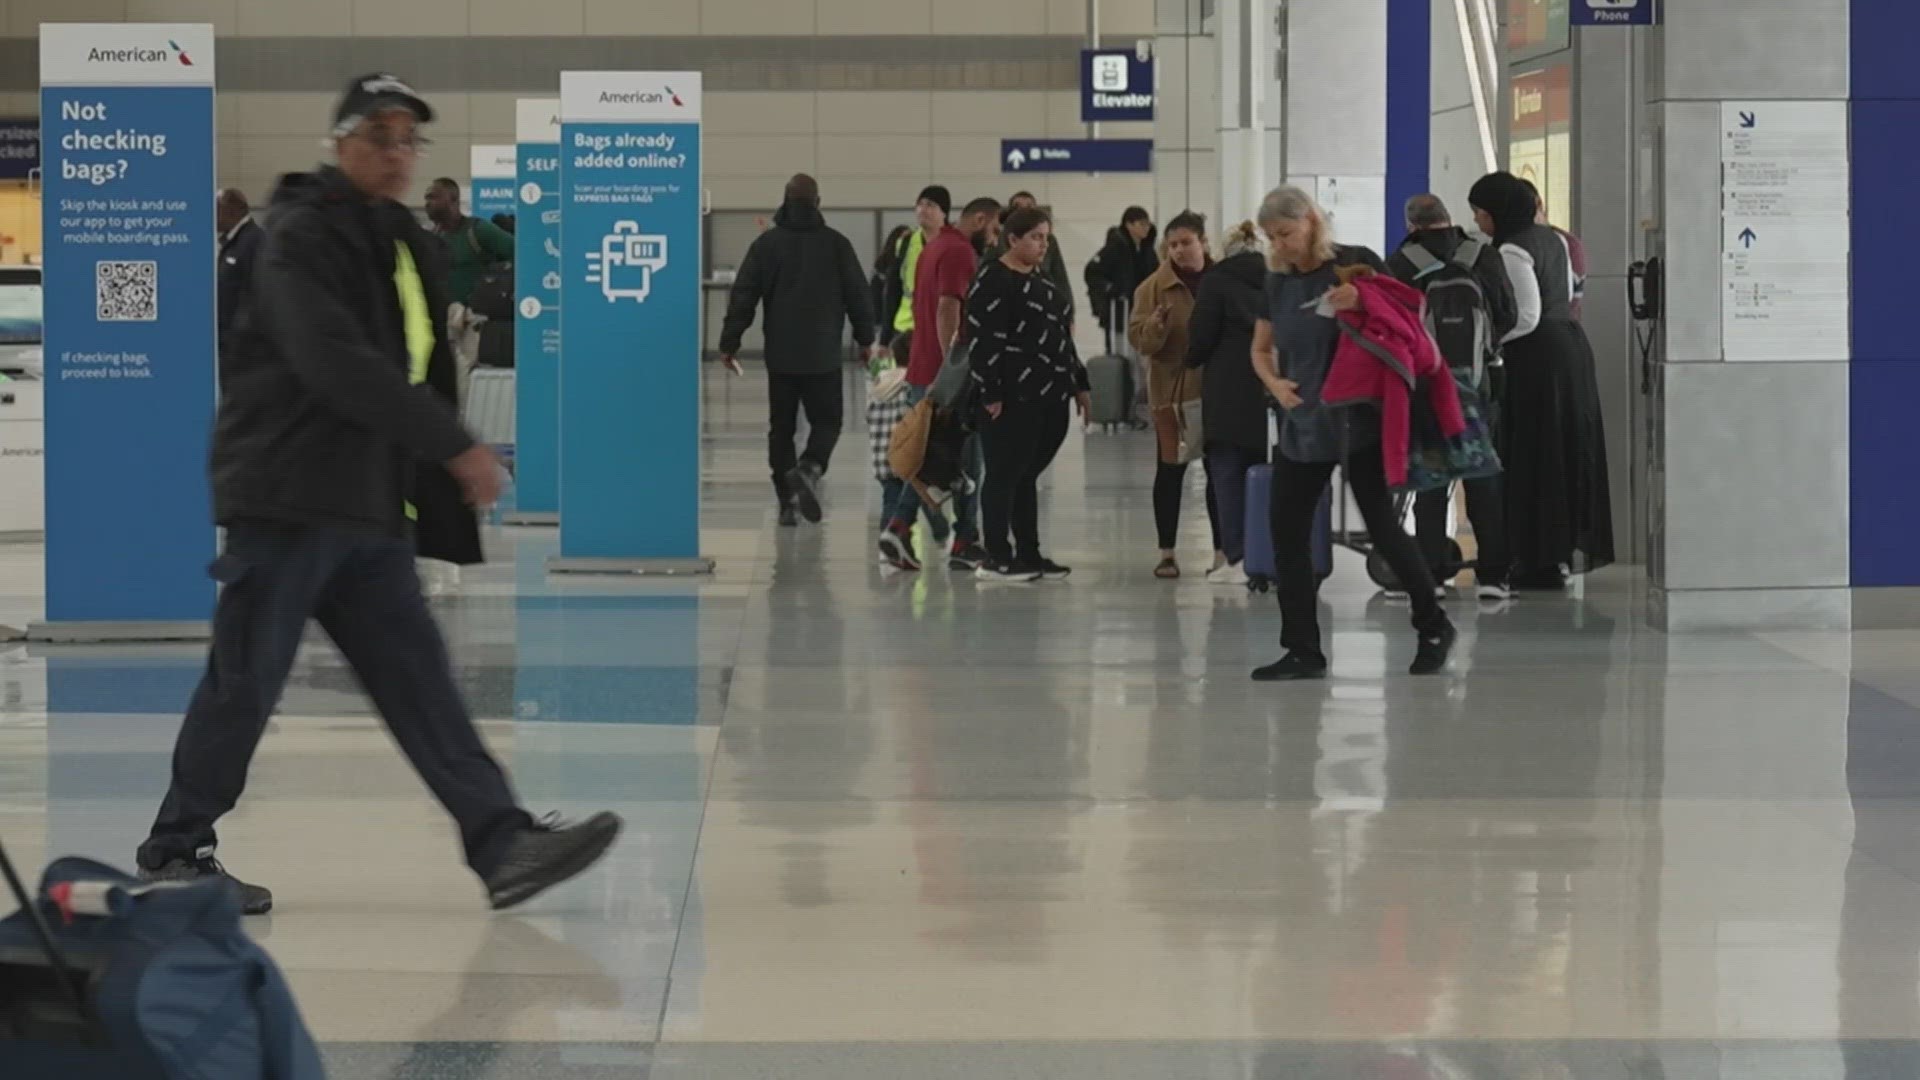 But that's not to say DFW wasn't bustling. Passenger traffic increased 11.4% to nearly 82 million, according to ACI.